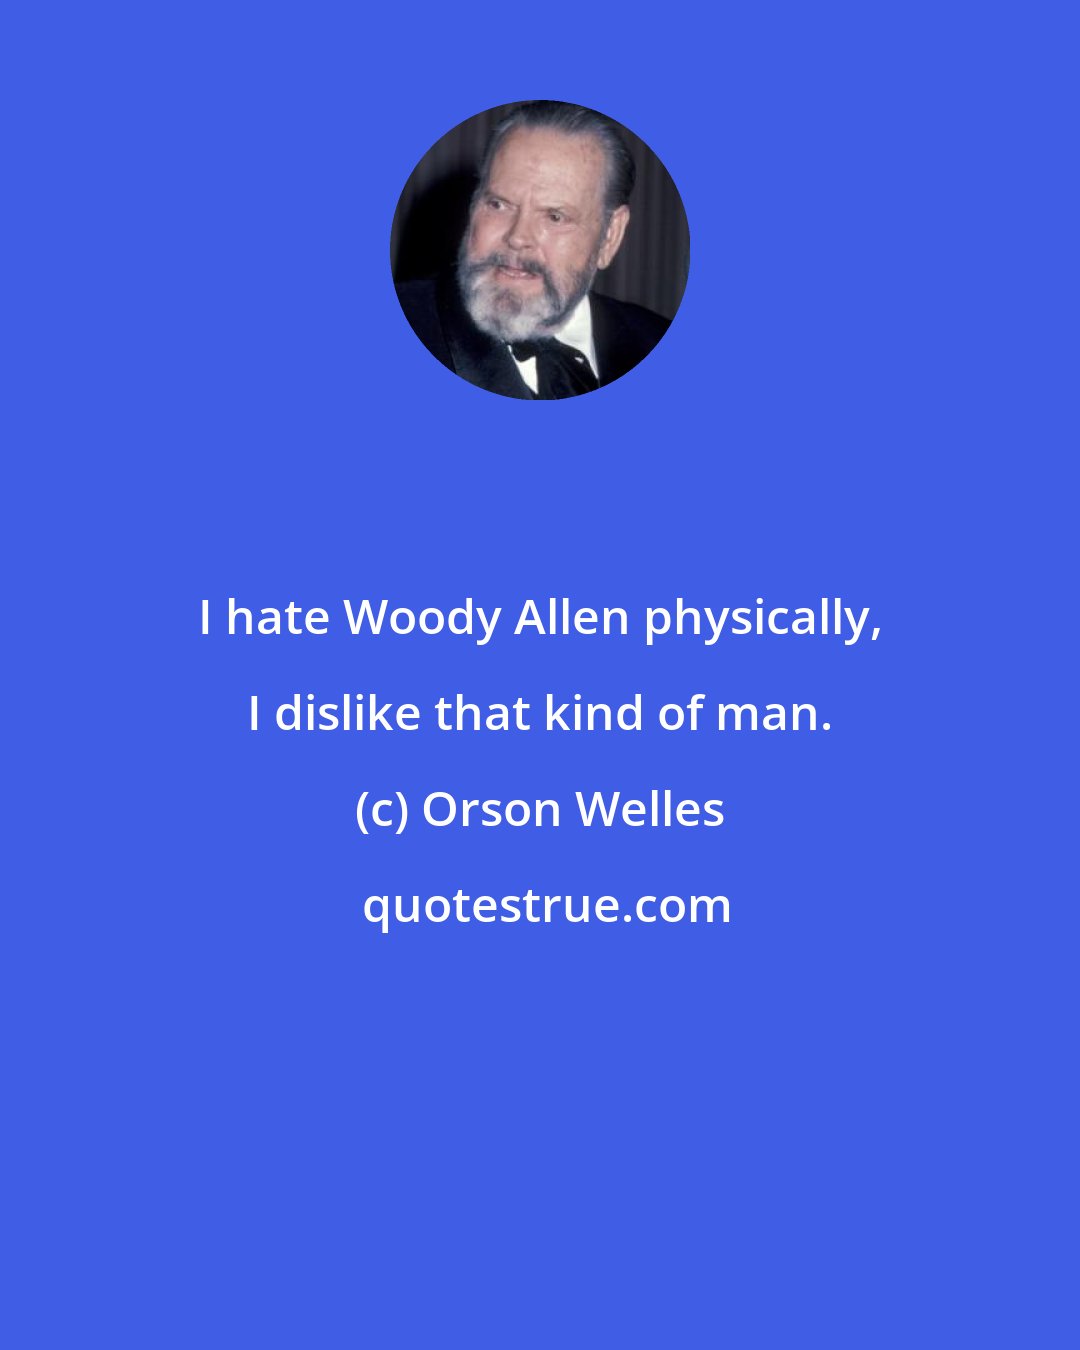 Orson Welles: I hate Woody Allen physically, I dislike that kind of man.